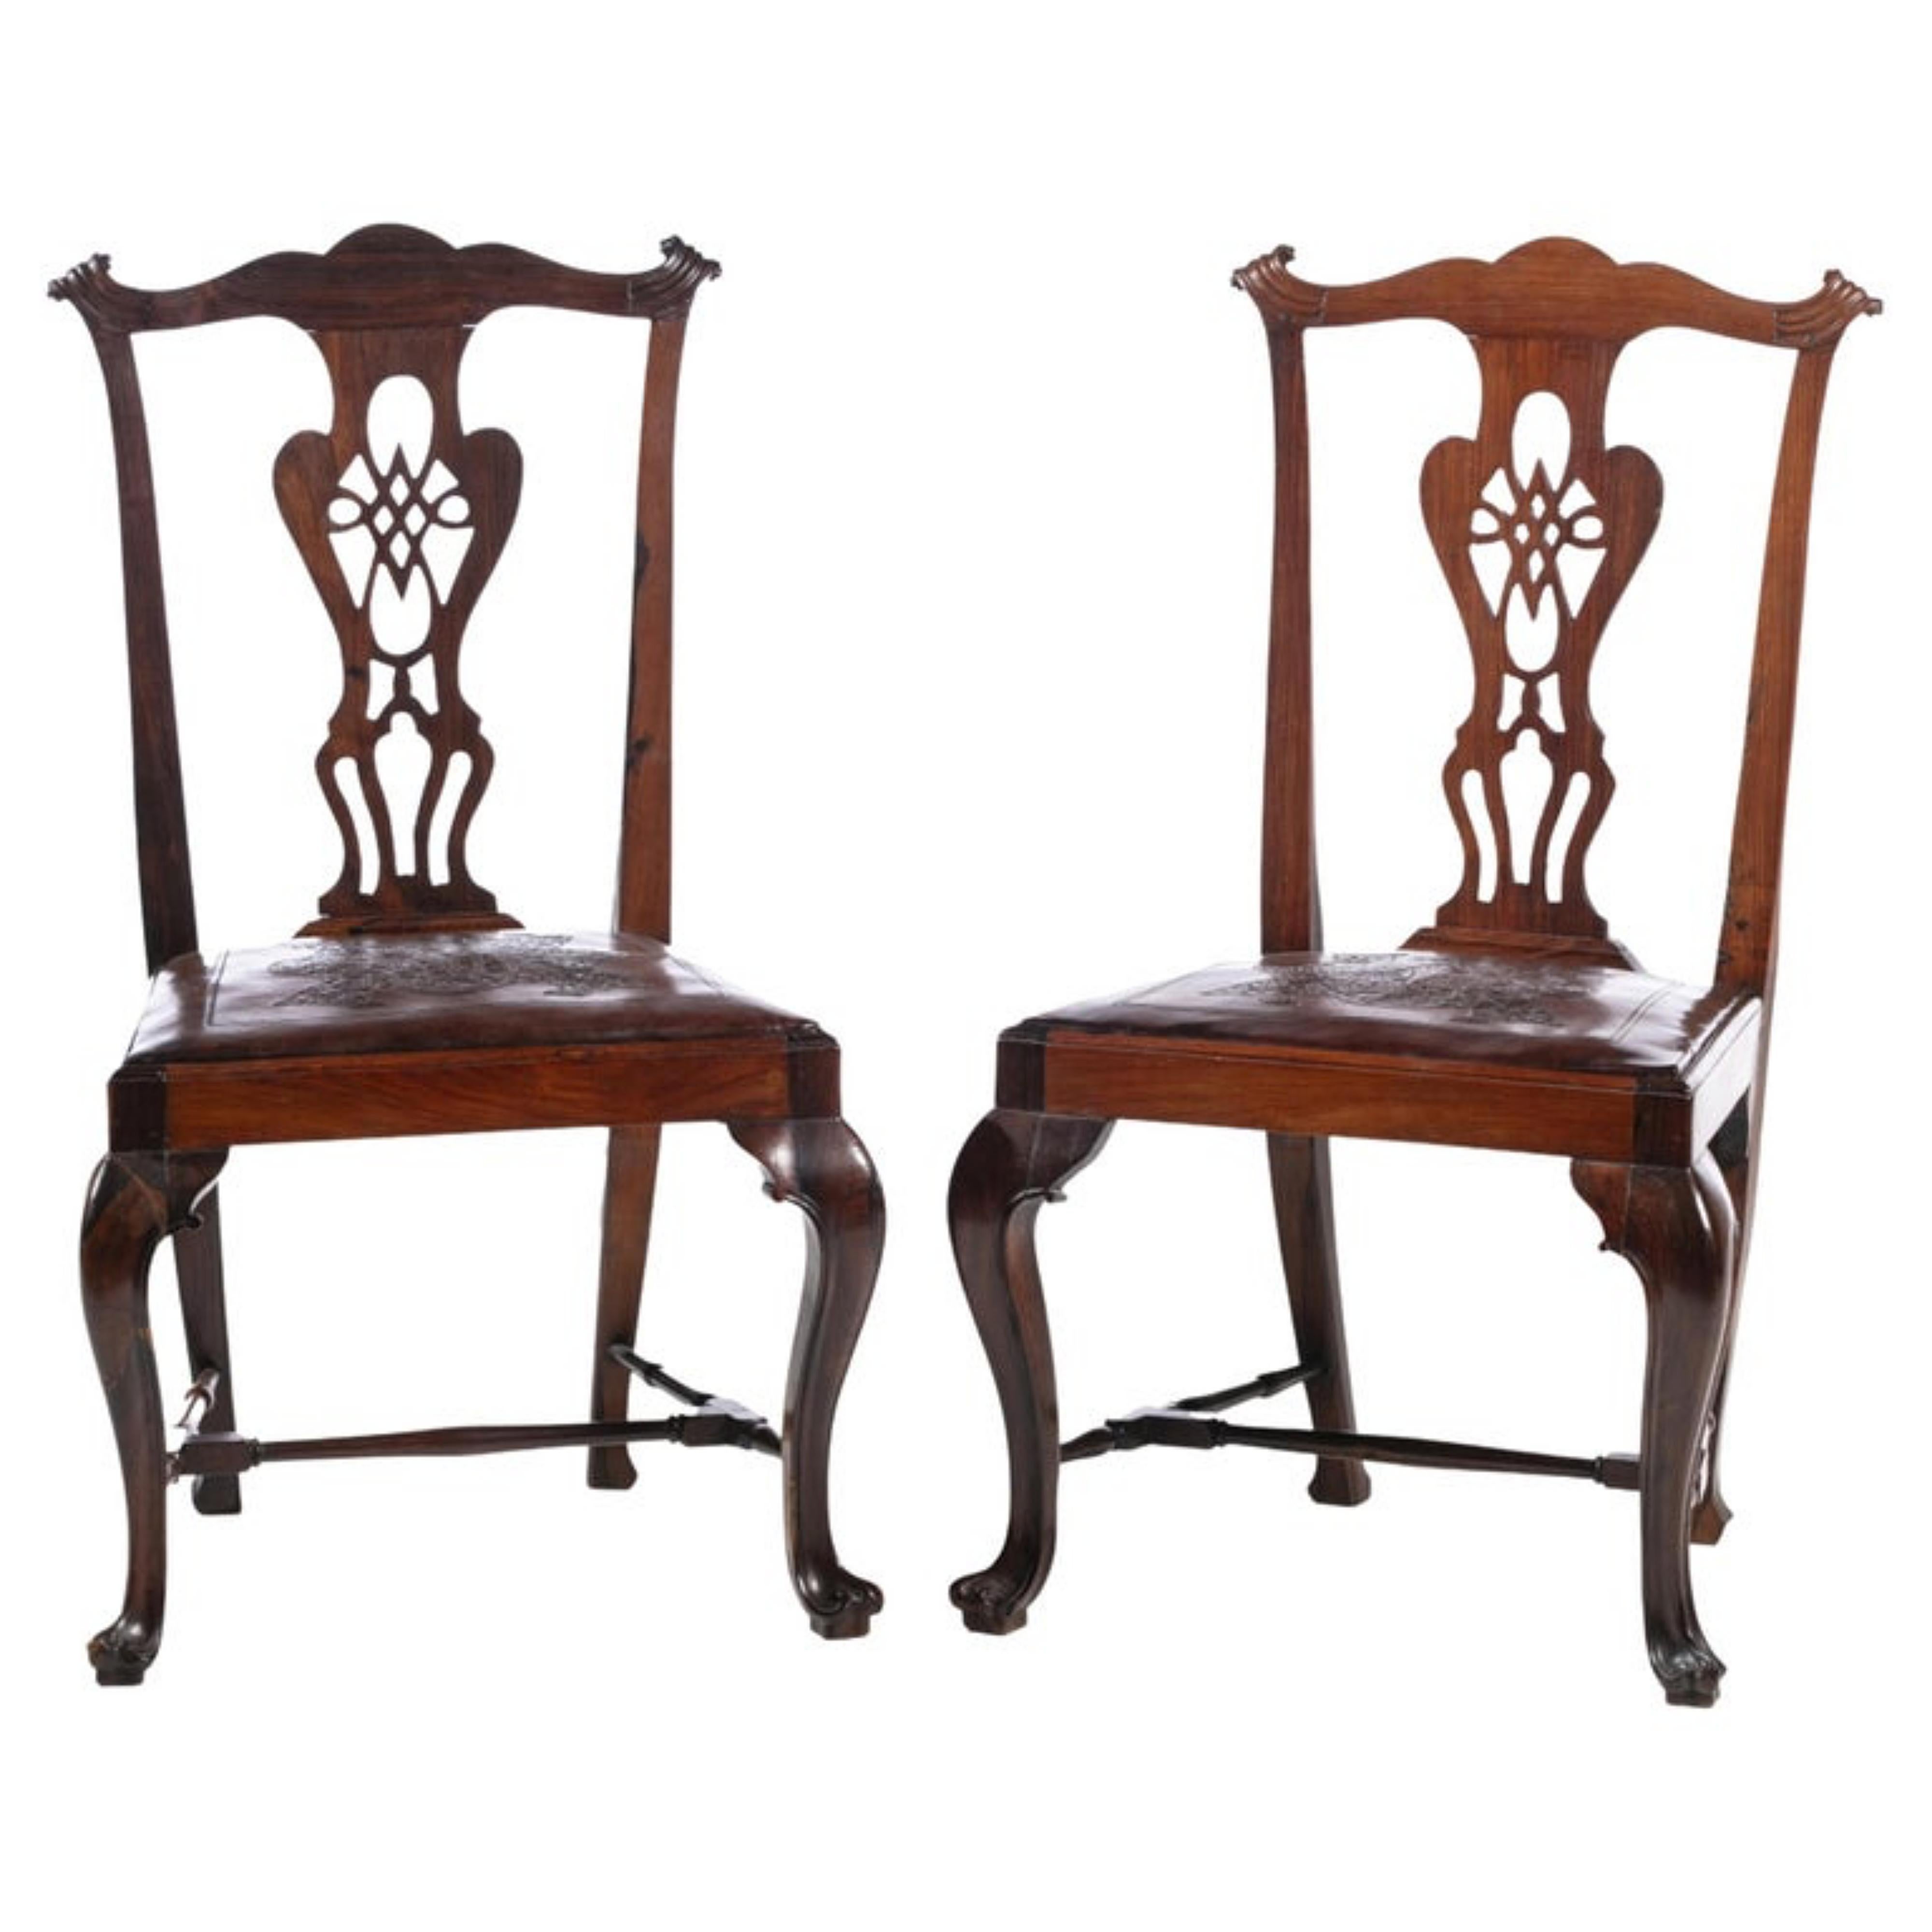 Wood PAIR OF PORTUGUESE CHAIRS 18th Century For Sale